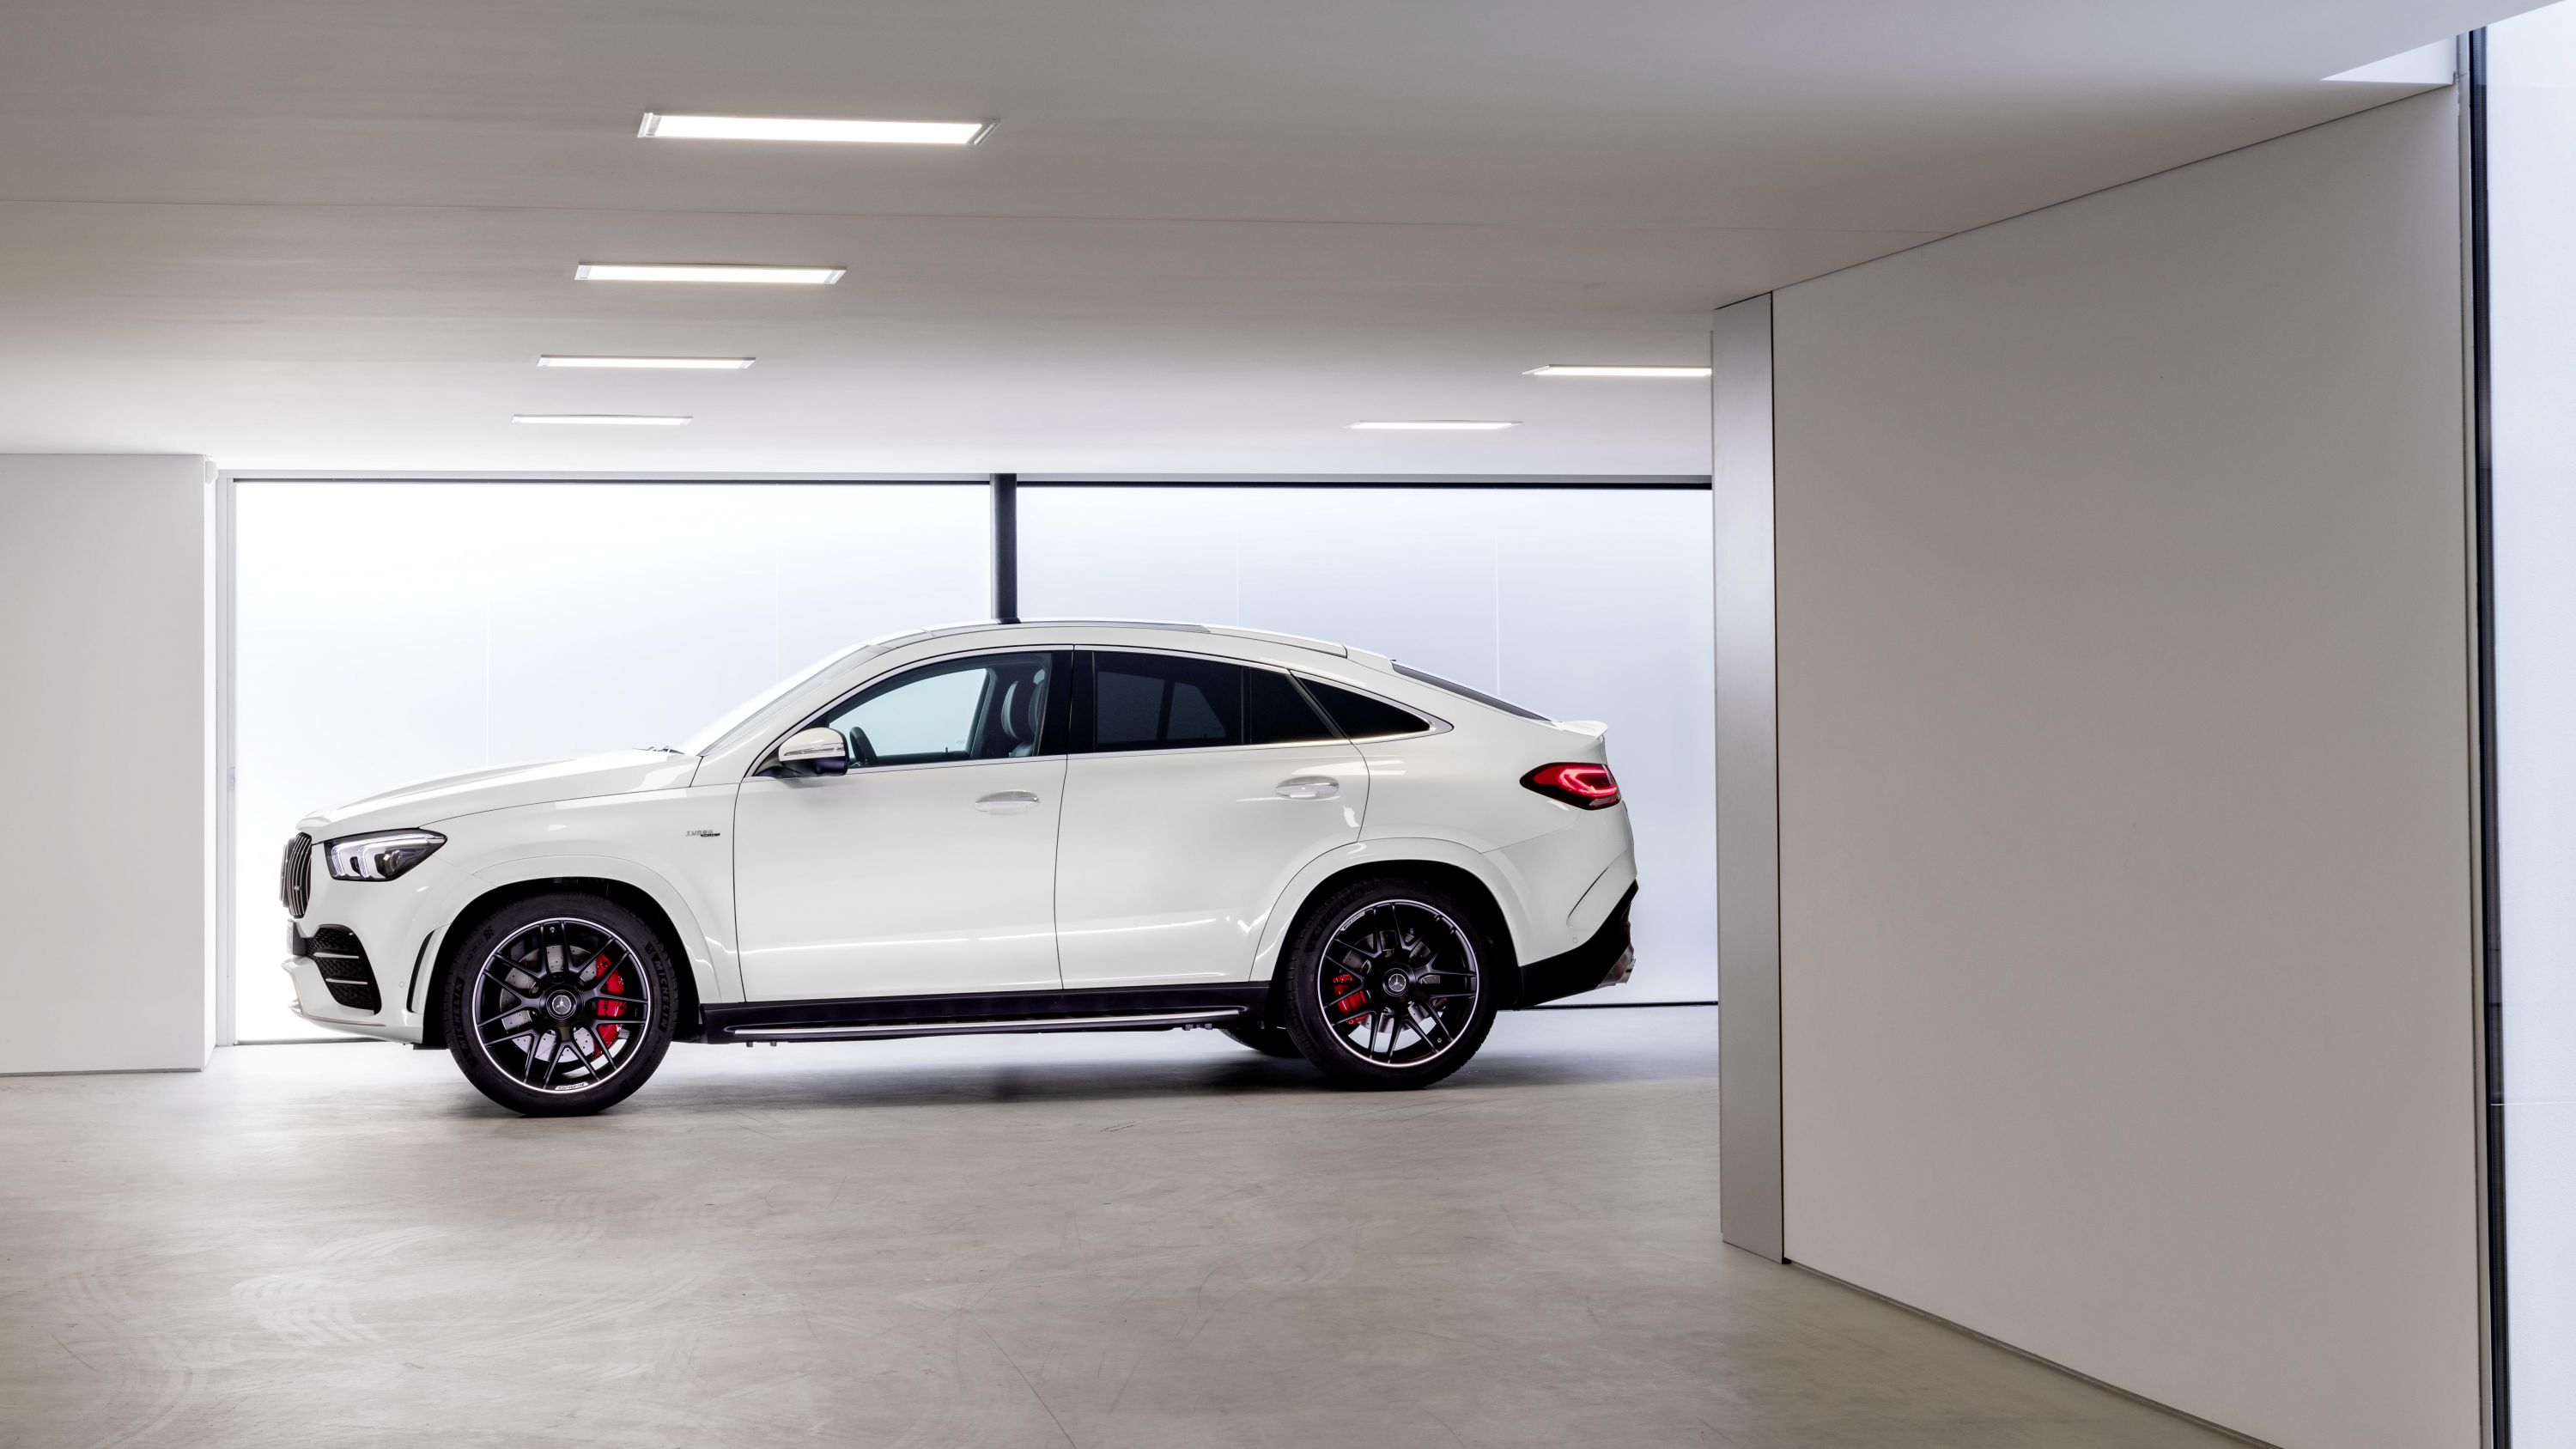 2020 Mercedes-Benz GLE Coupe price and specs | CarExpert